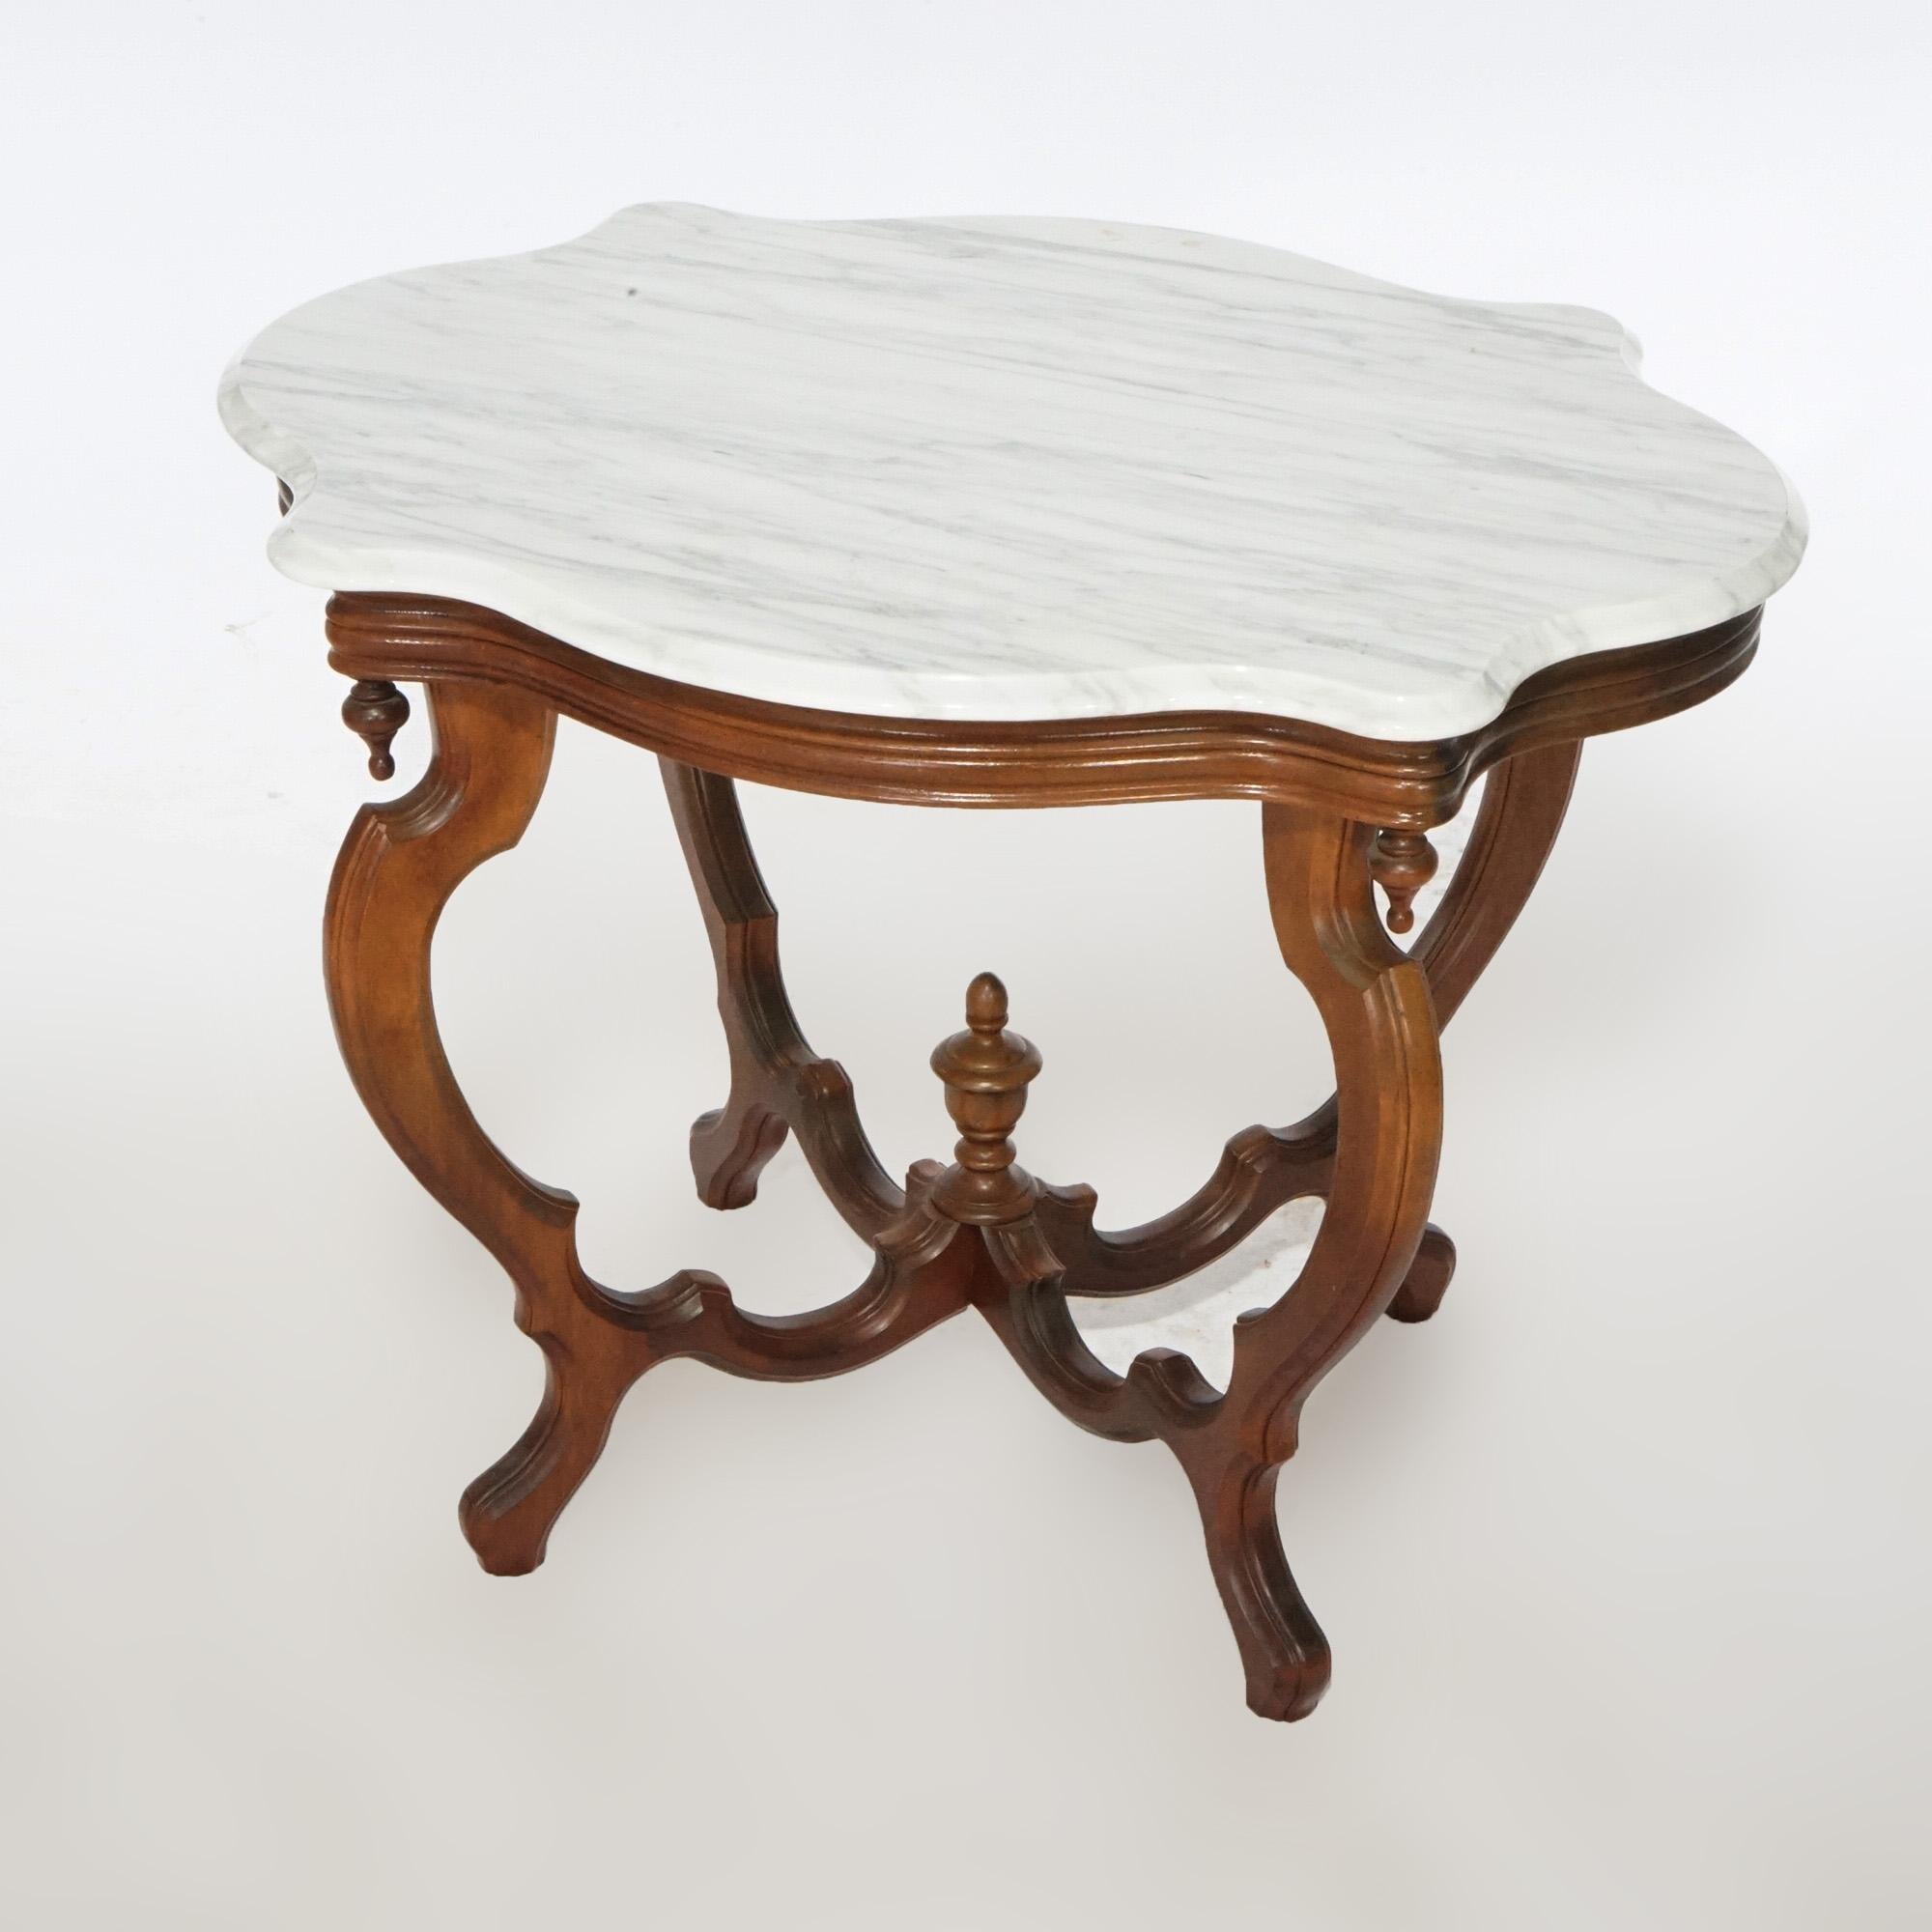 An antique Victorian parlor table offers shaped and beveled marble turtle top over walnut base having reeded skirt with drop finials and raised on scroll from cabriole legs with central urn-form finial, c1890.

Measures- 28.25''H x 36''W x 28''D.